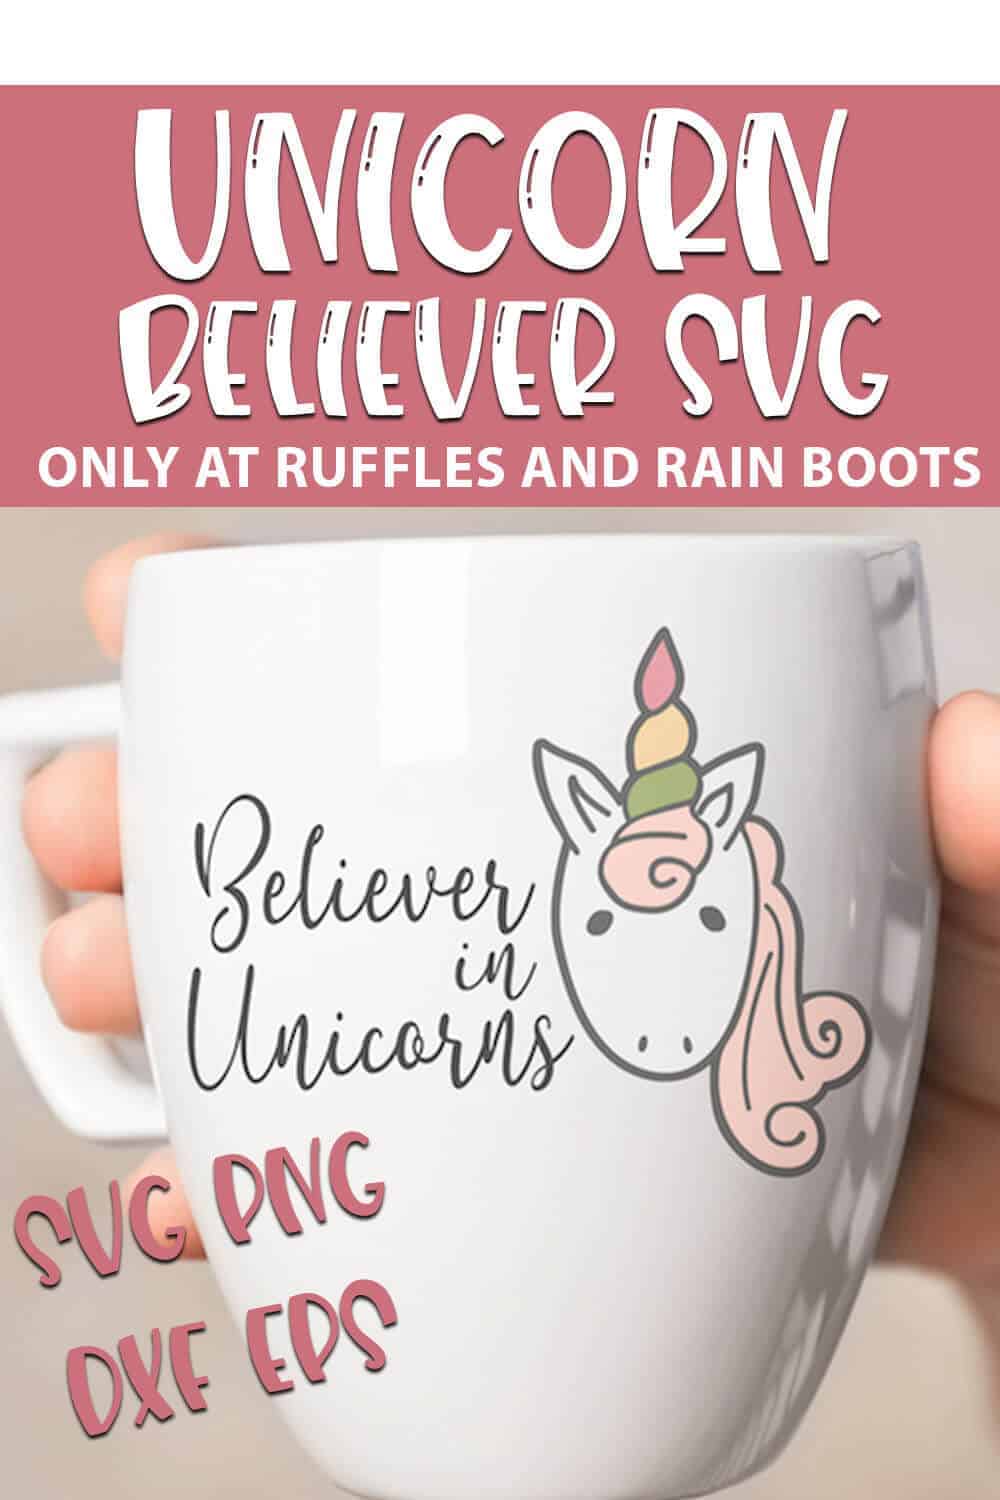 Believer in Unicorns SVG cut file for crafts